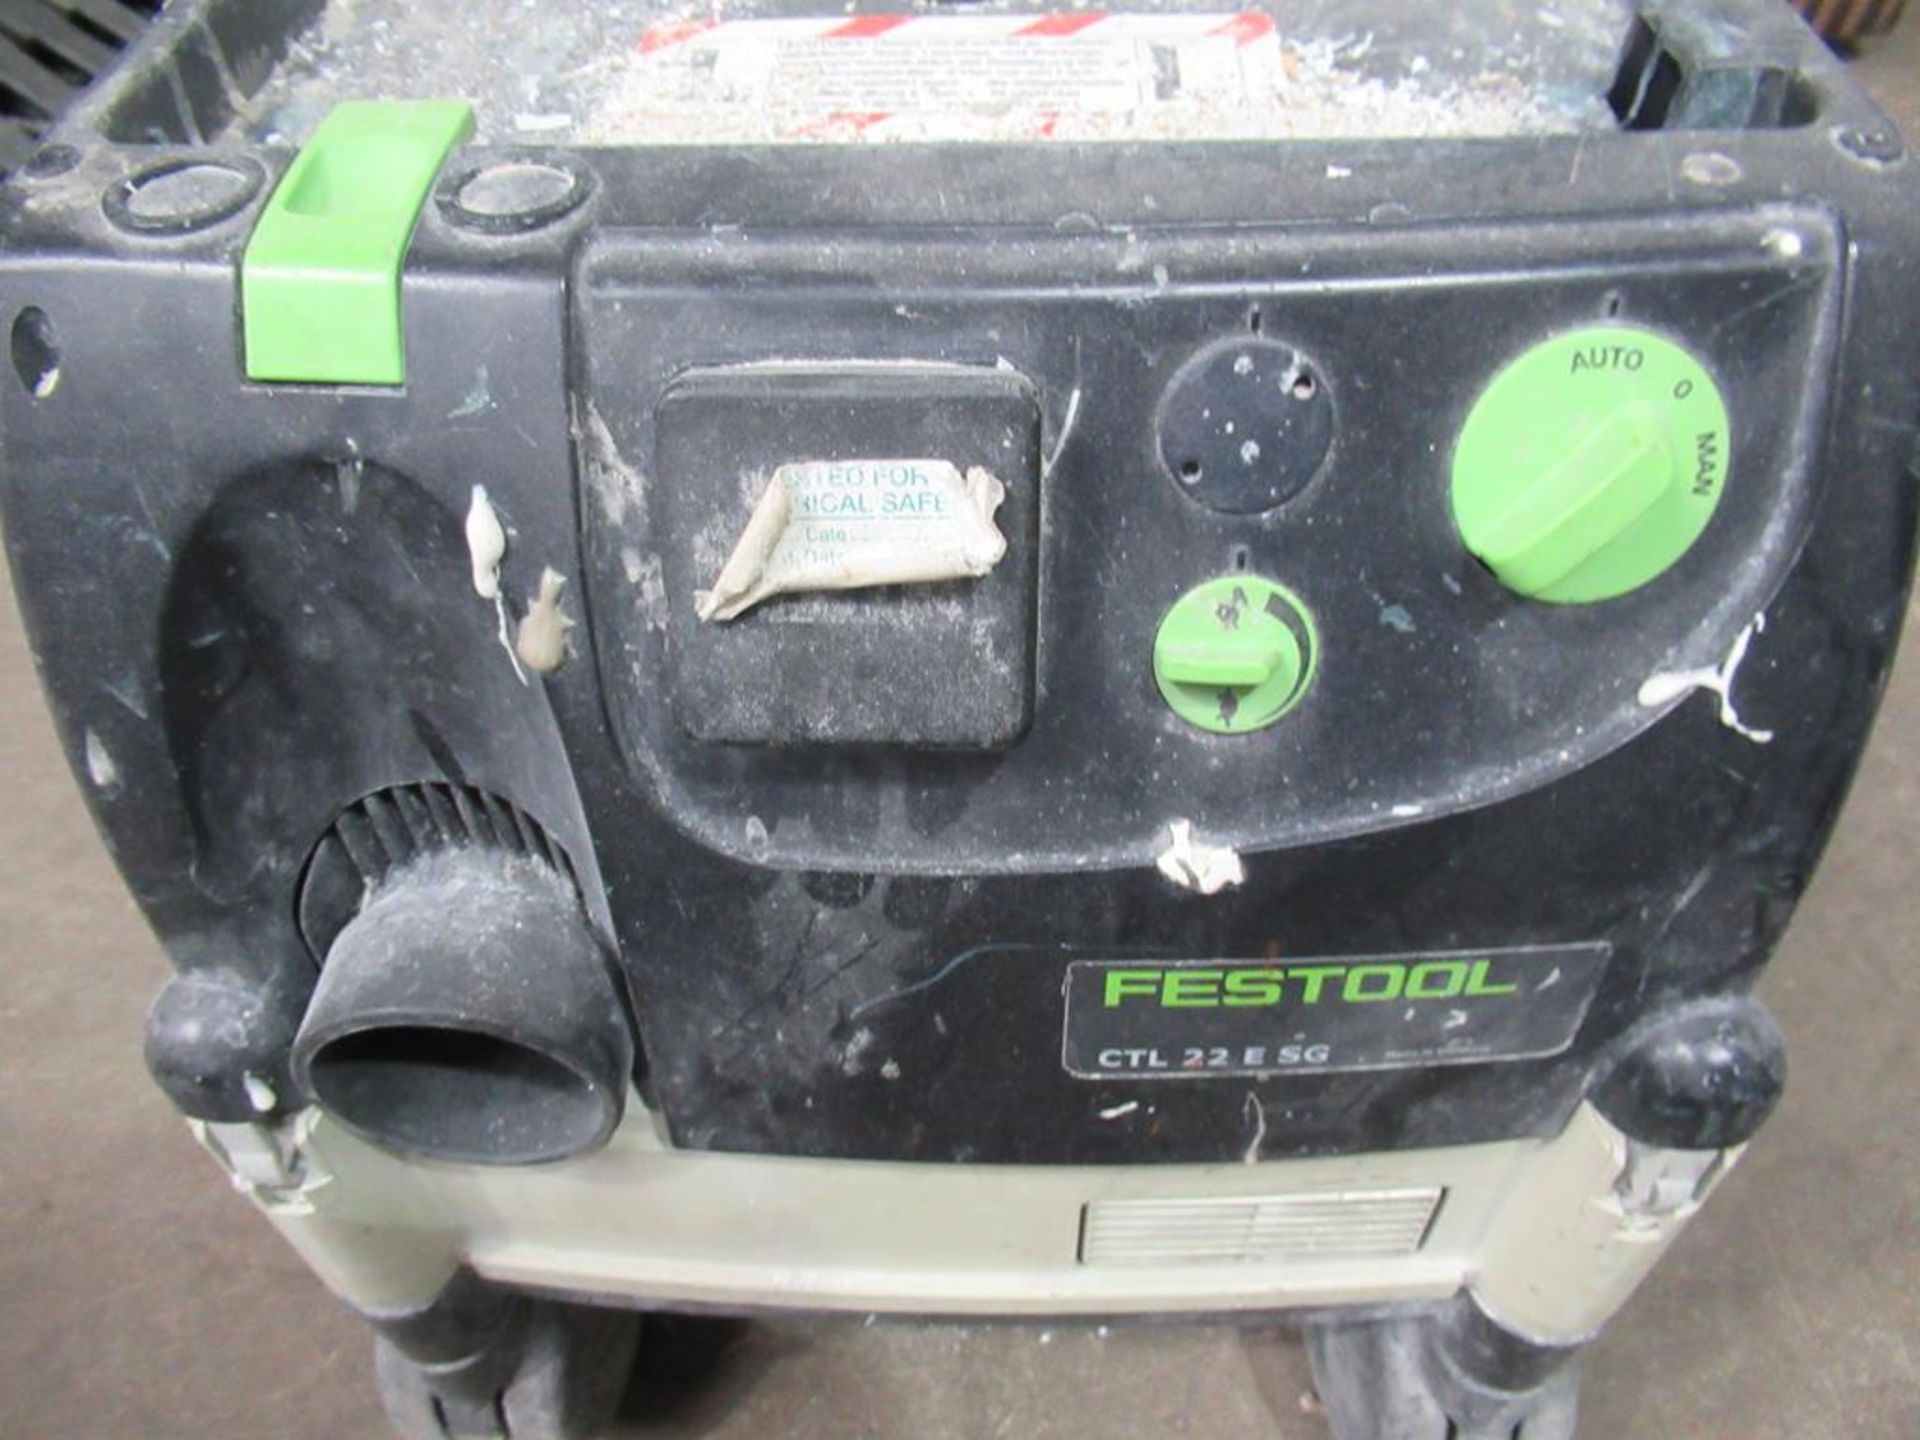 Festool CTL 22 E SG Portable Dust Extractor. - Image 3 of 4